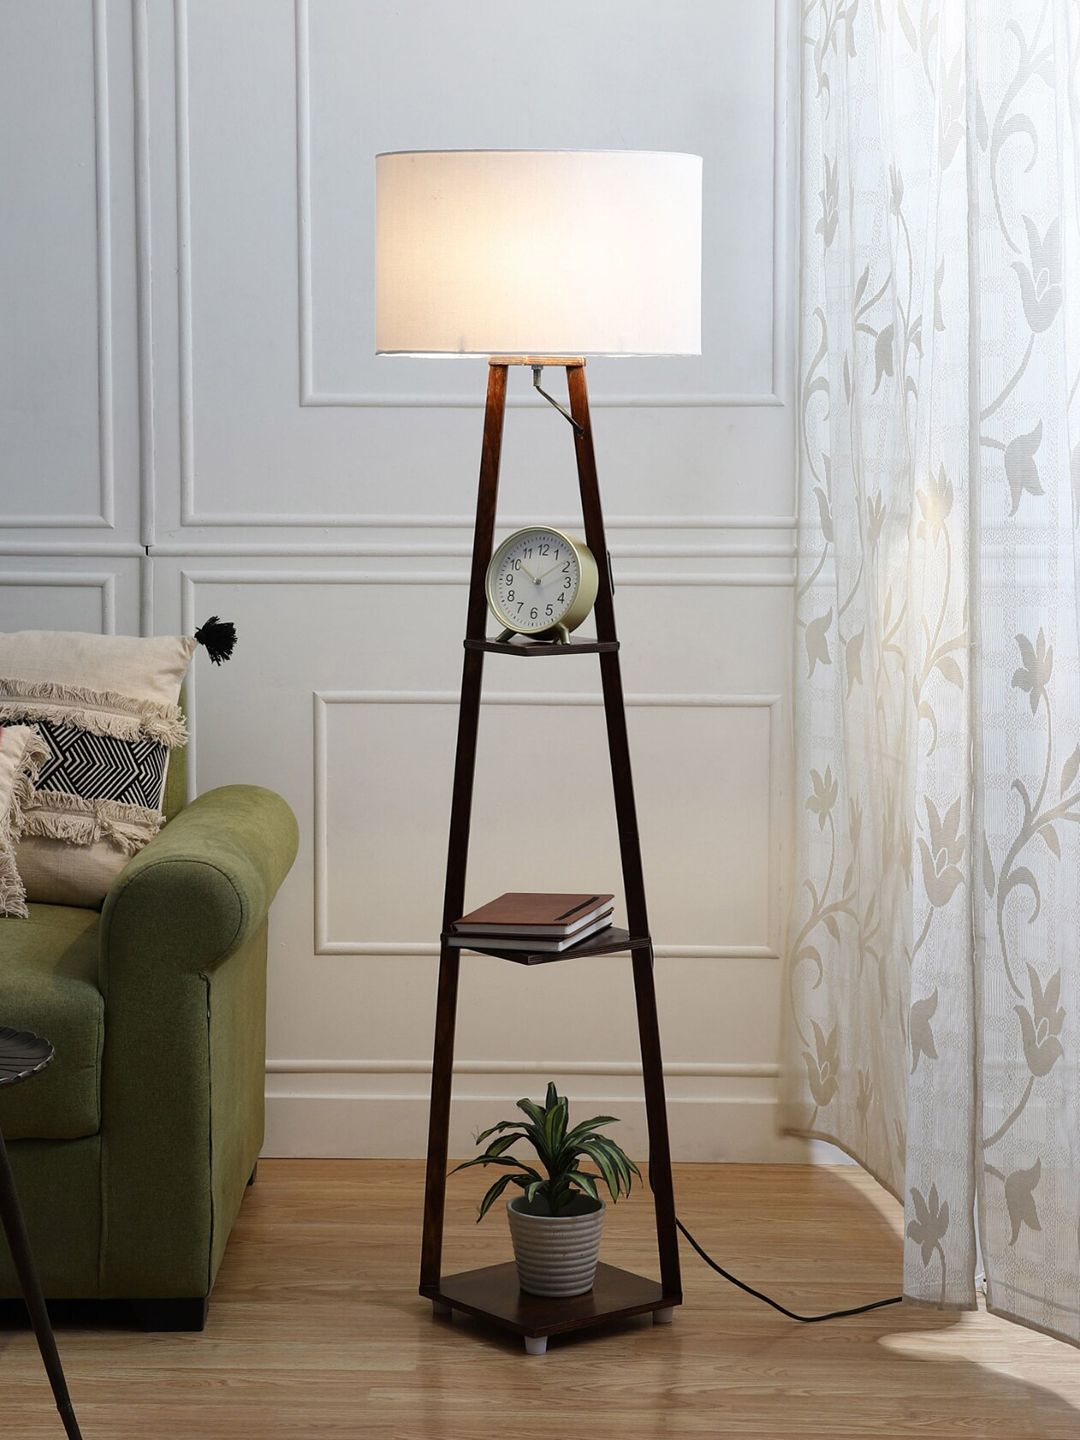 SANDED EDGE Off White 3 Tier Shelf Space Cylindrical Contemporary Floor Lamp Price in India